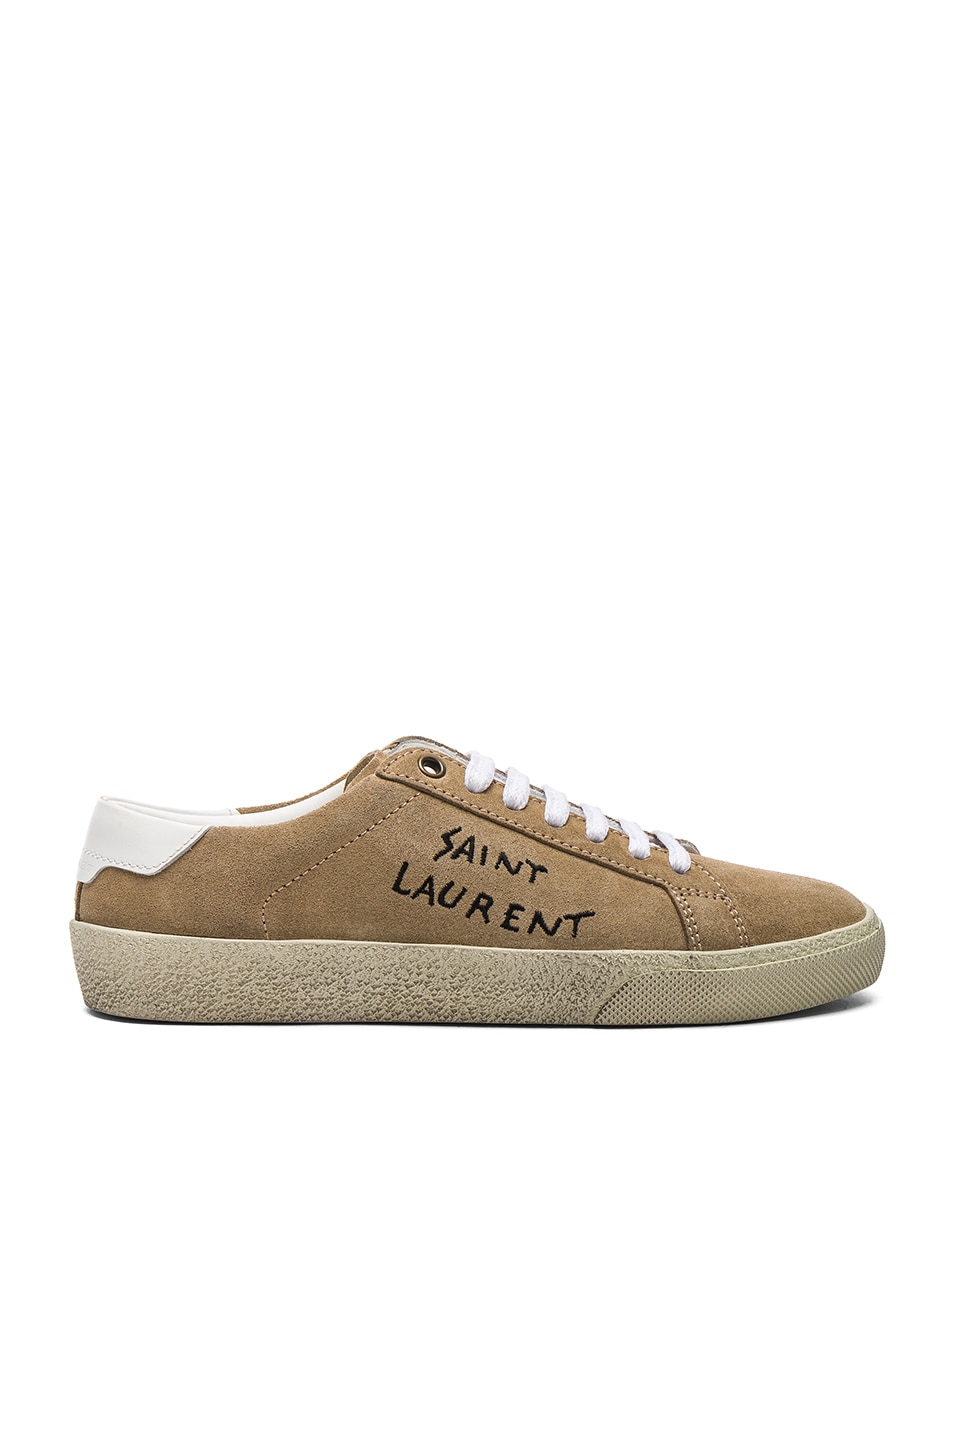 saint laurent court classic embroidered sneakers